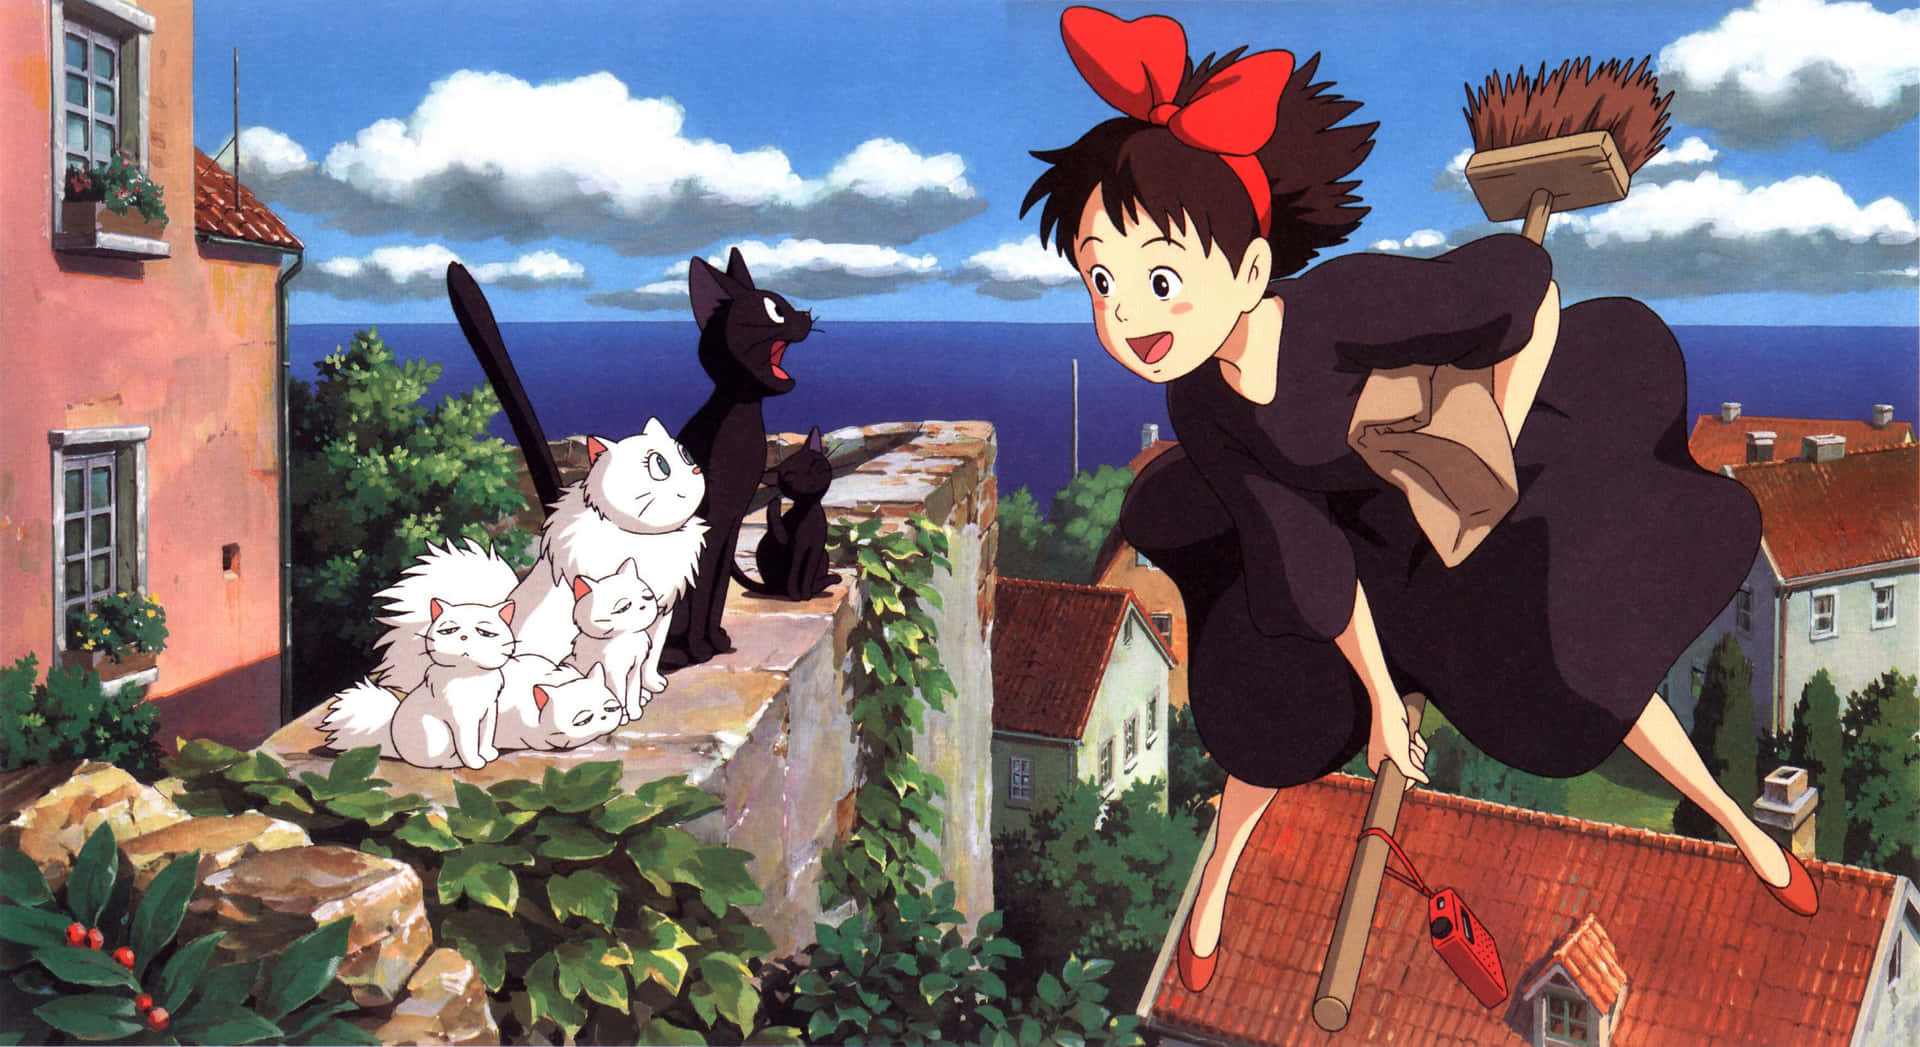 Kiki flying over the city with her cat Jiji on her broom Wallpaper